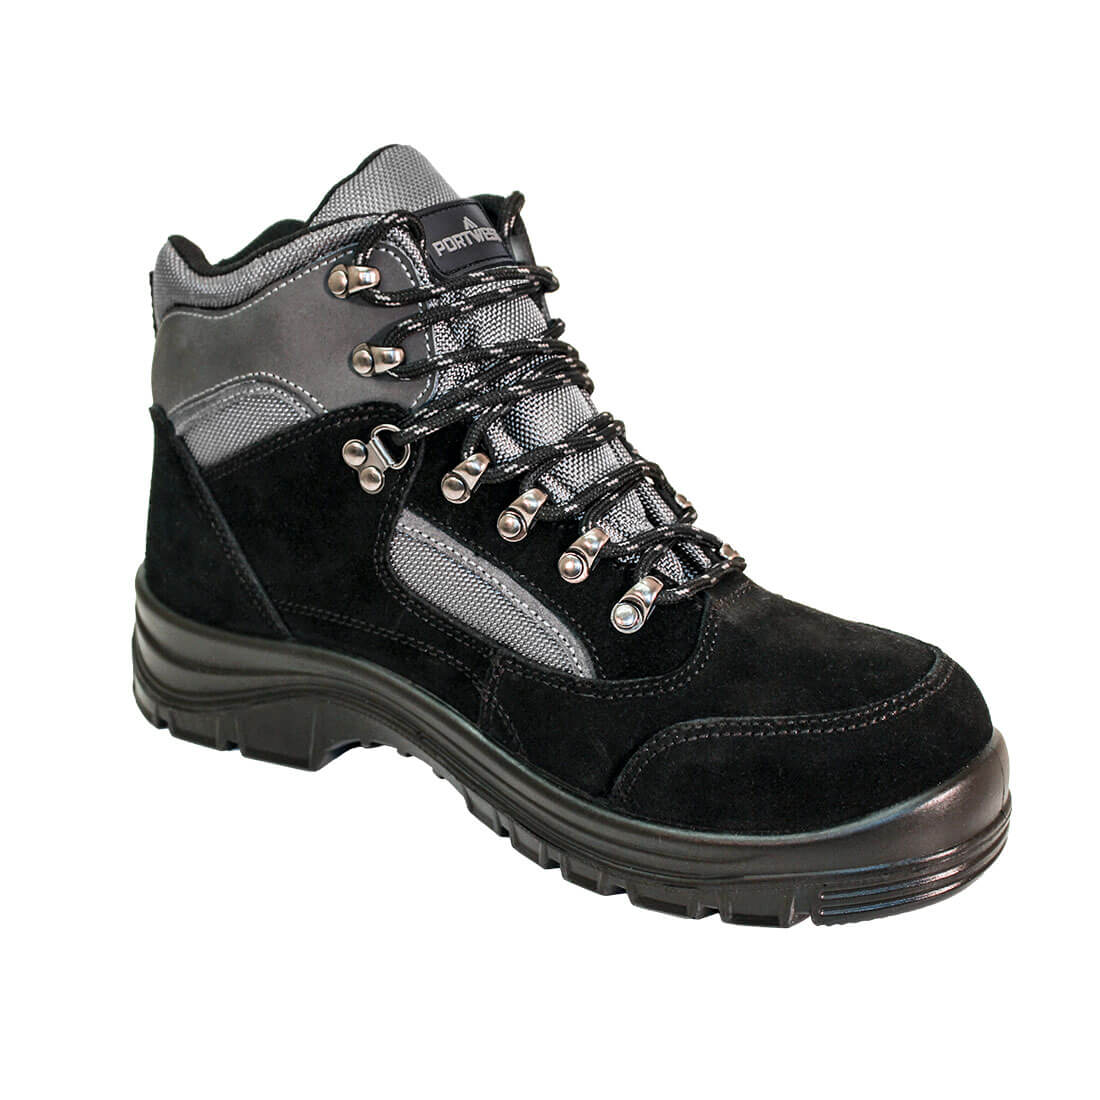 Steelite All Weather Hiker Boot S3 WR Boots FW66